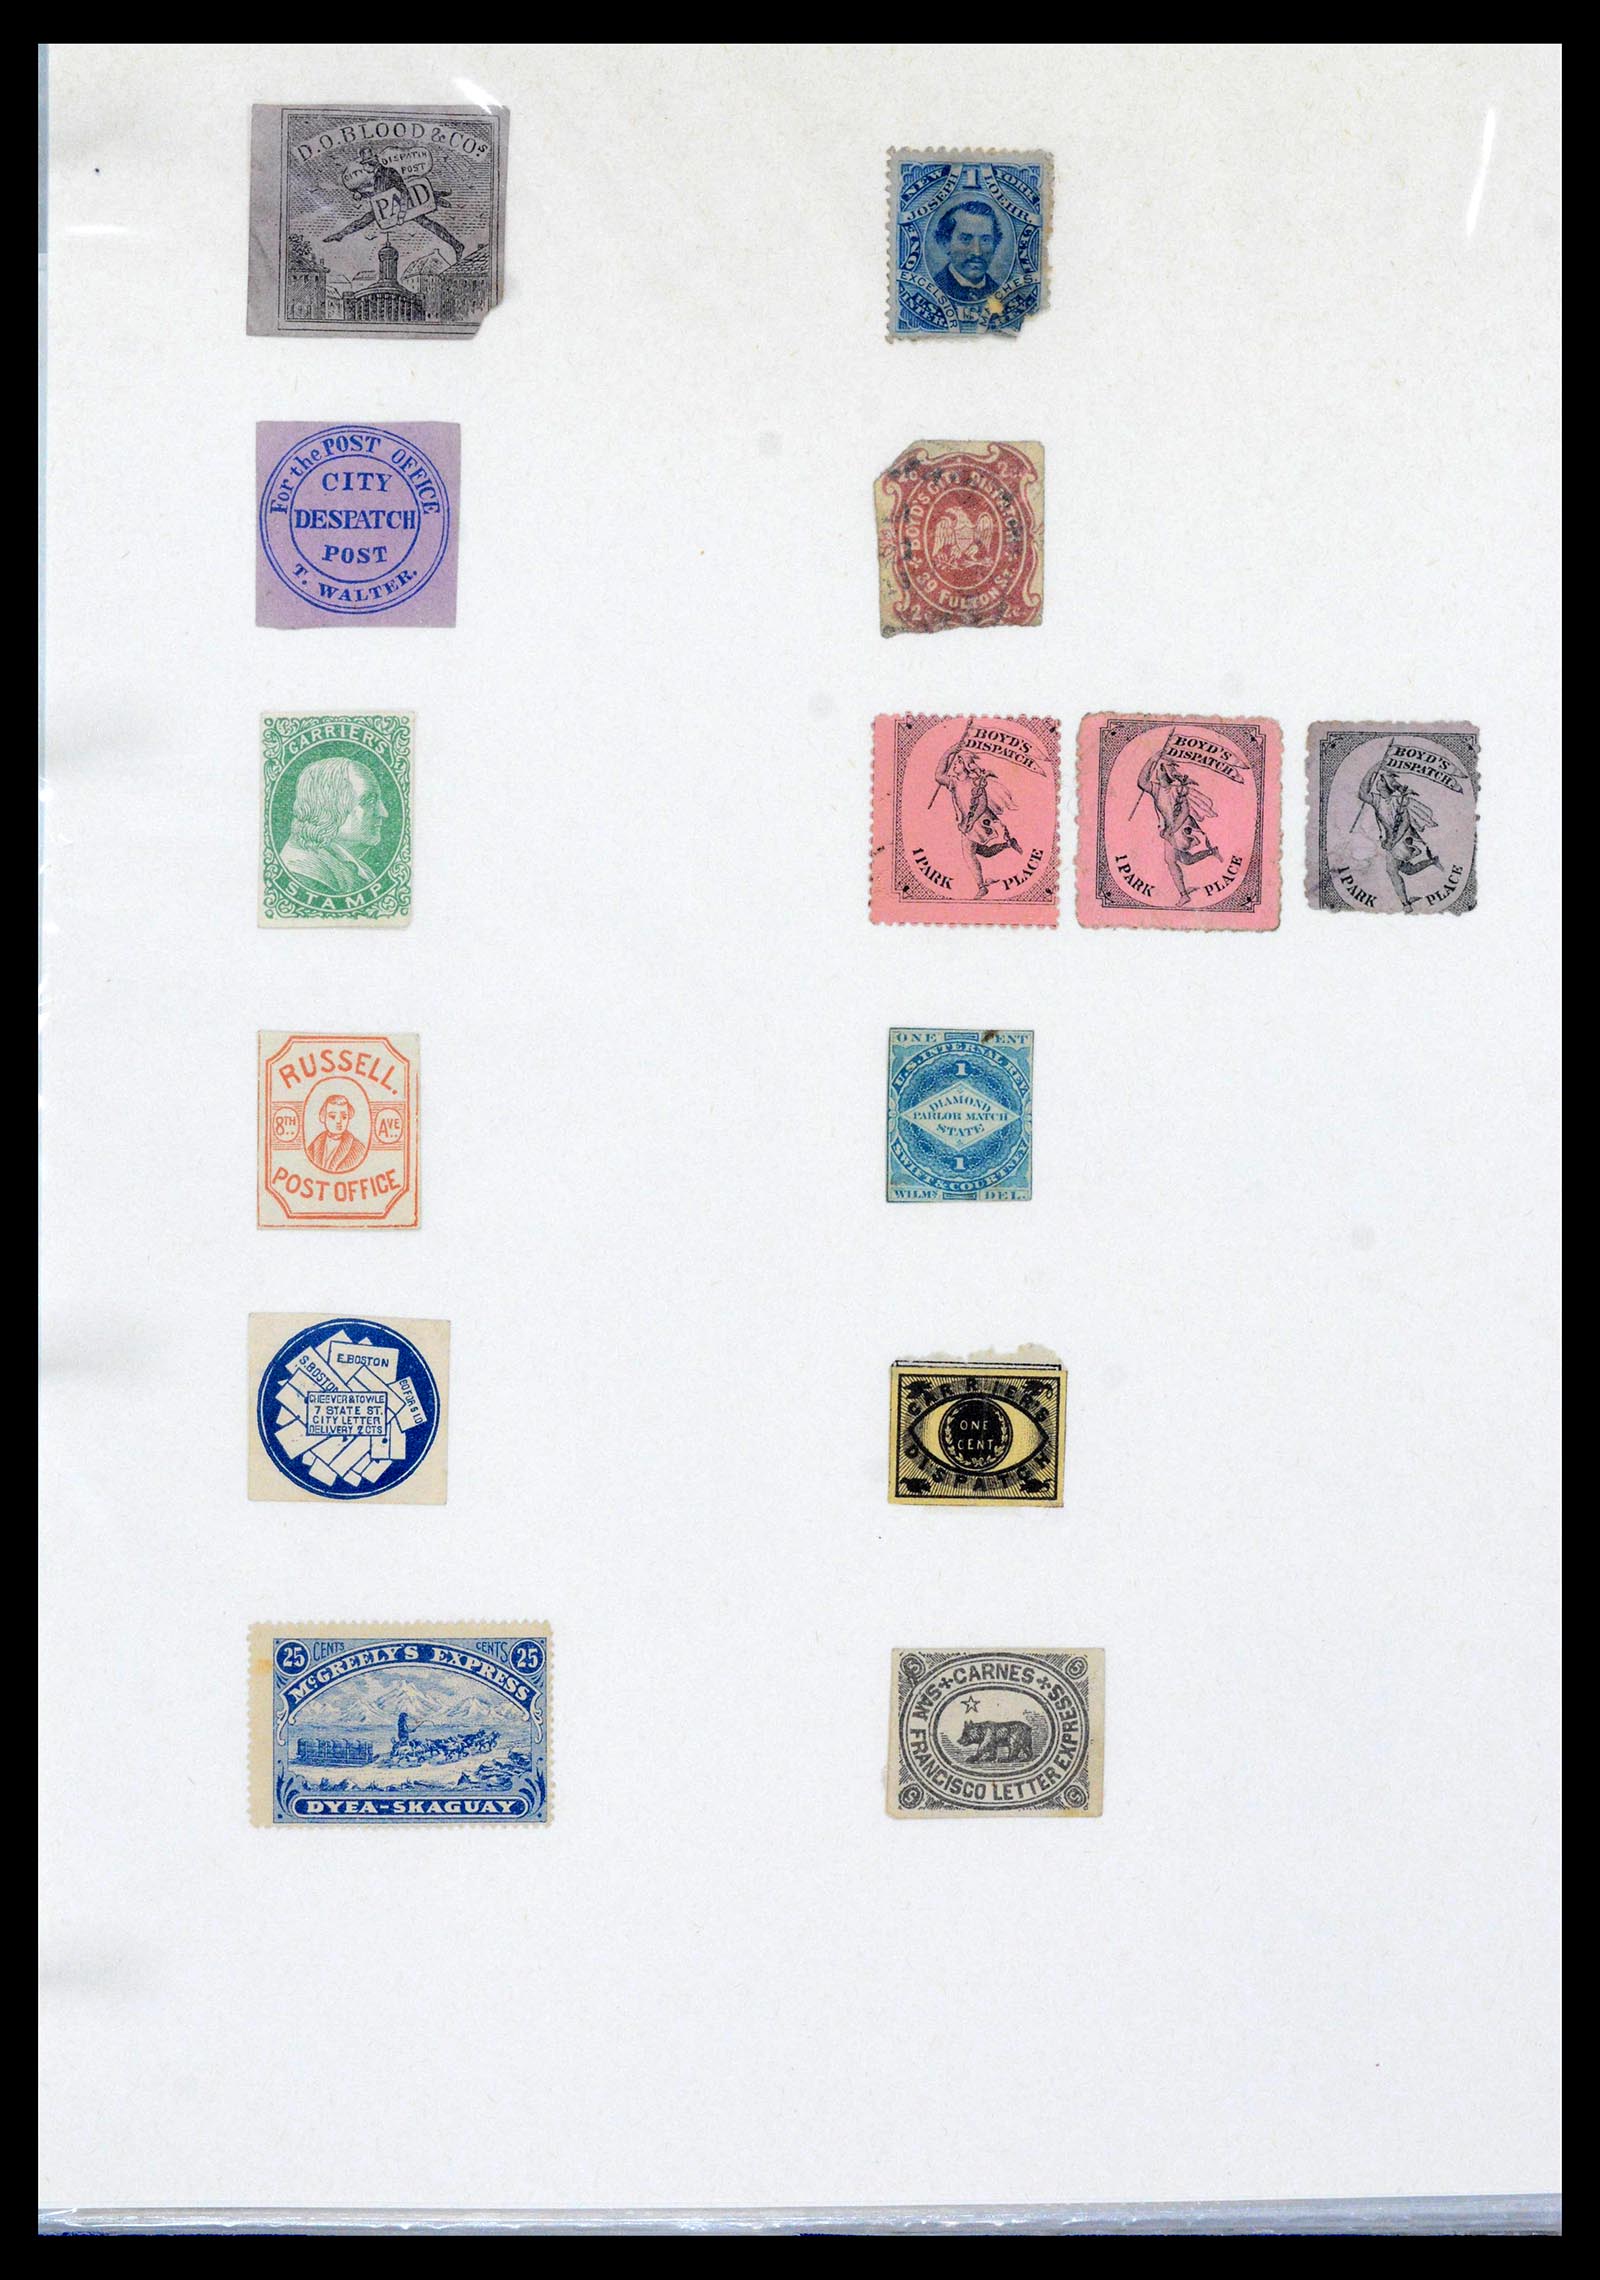 39374 0007 - Stamp collection 39374 USA locals 1850-1880.